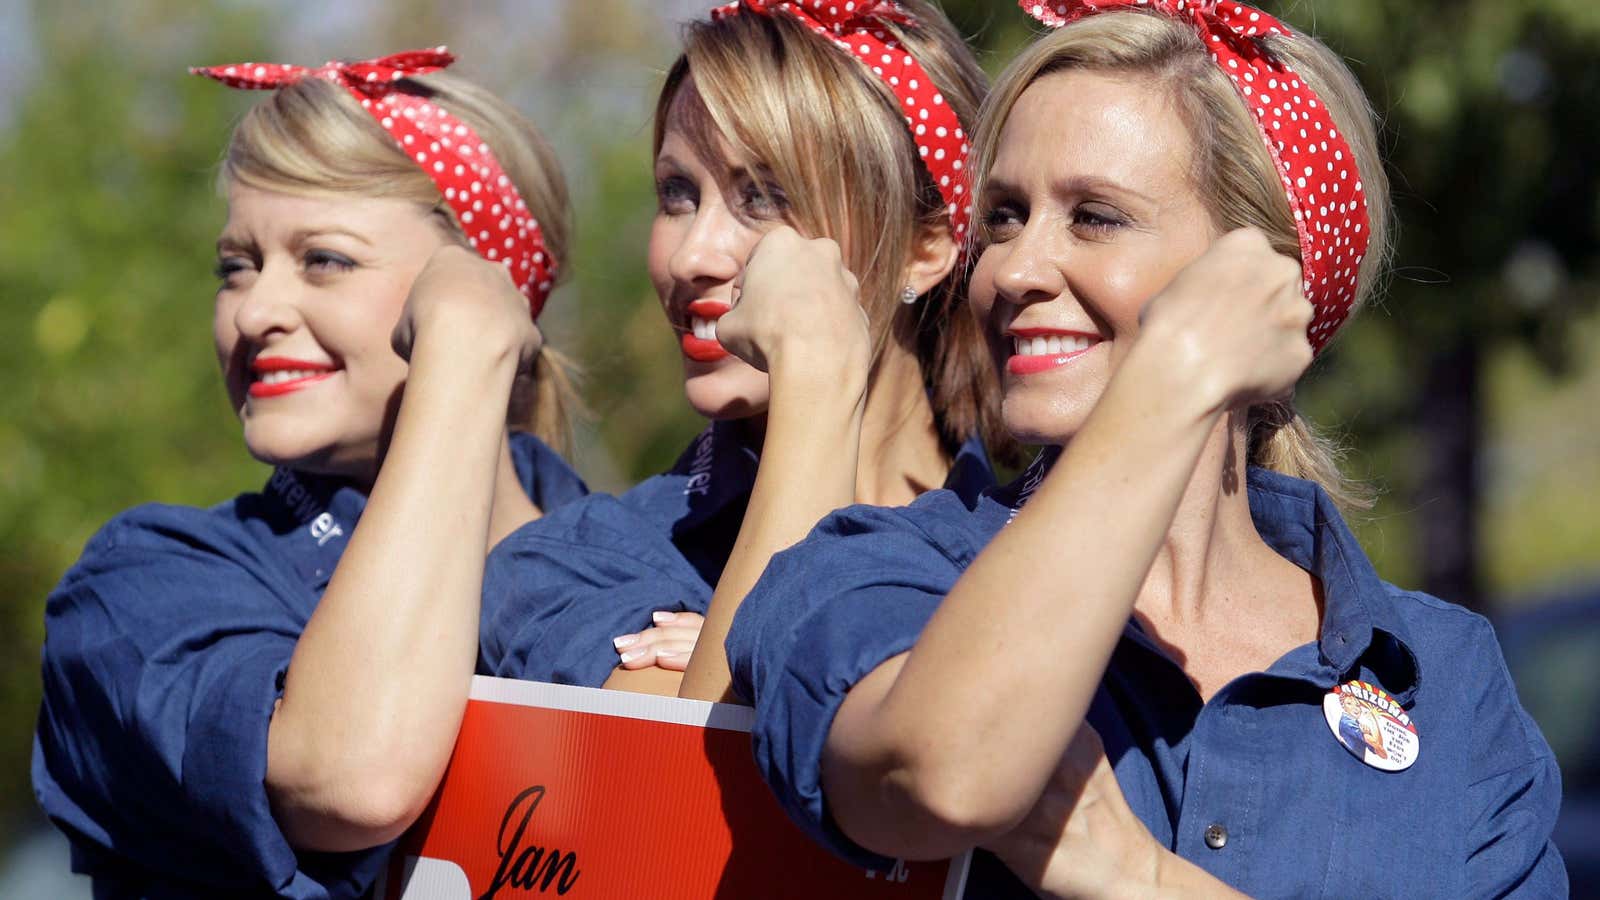 How the famous 'Rosie the Riveter' poster became a symbol of